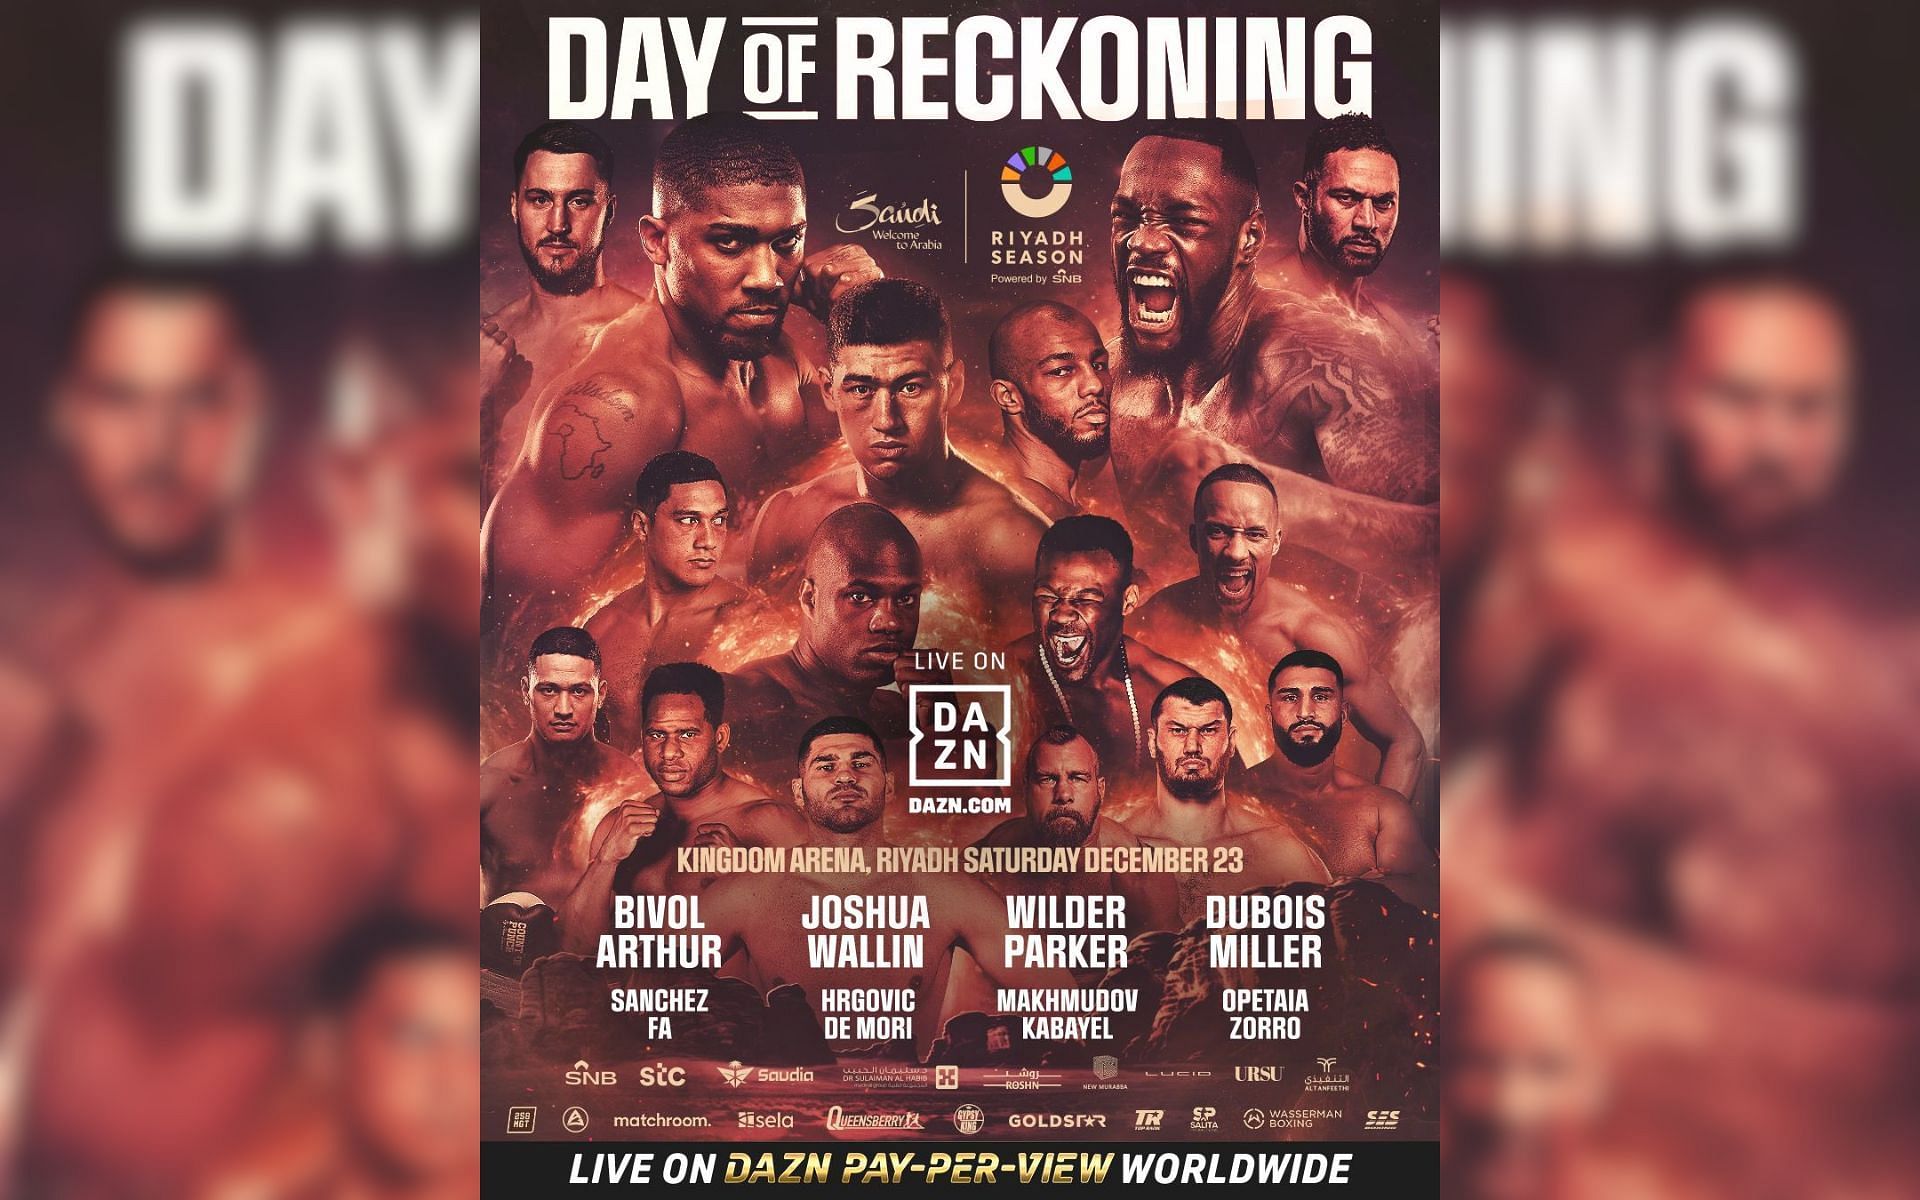 Day of Reckoning poster [Photo credit: @EddieHearn - X]